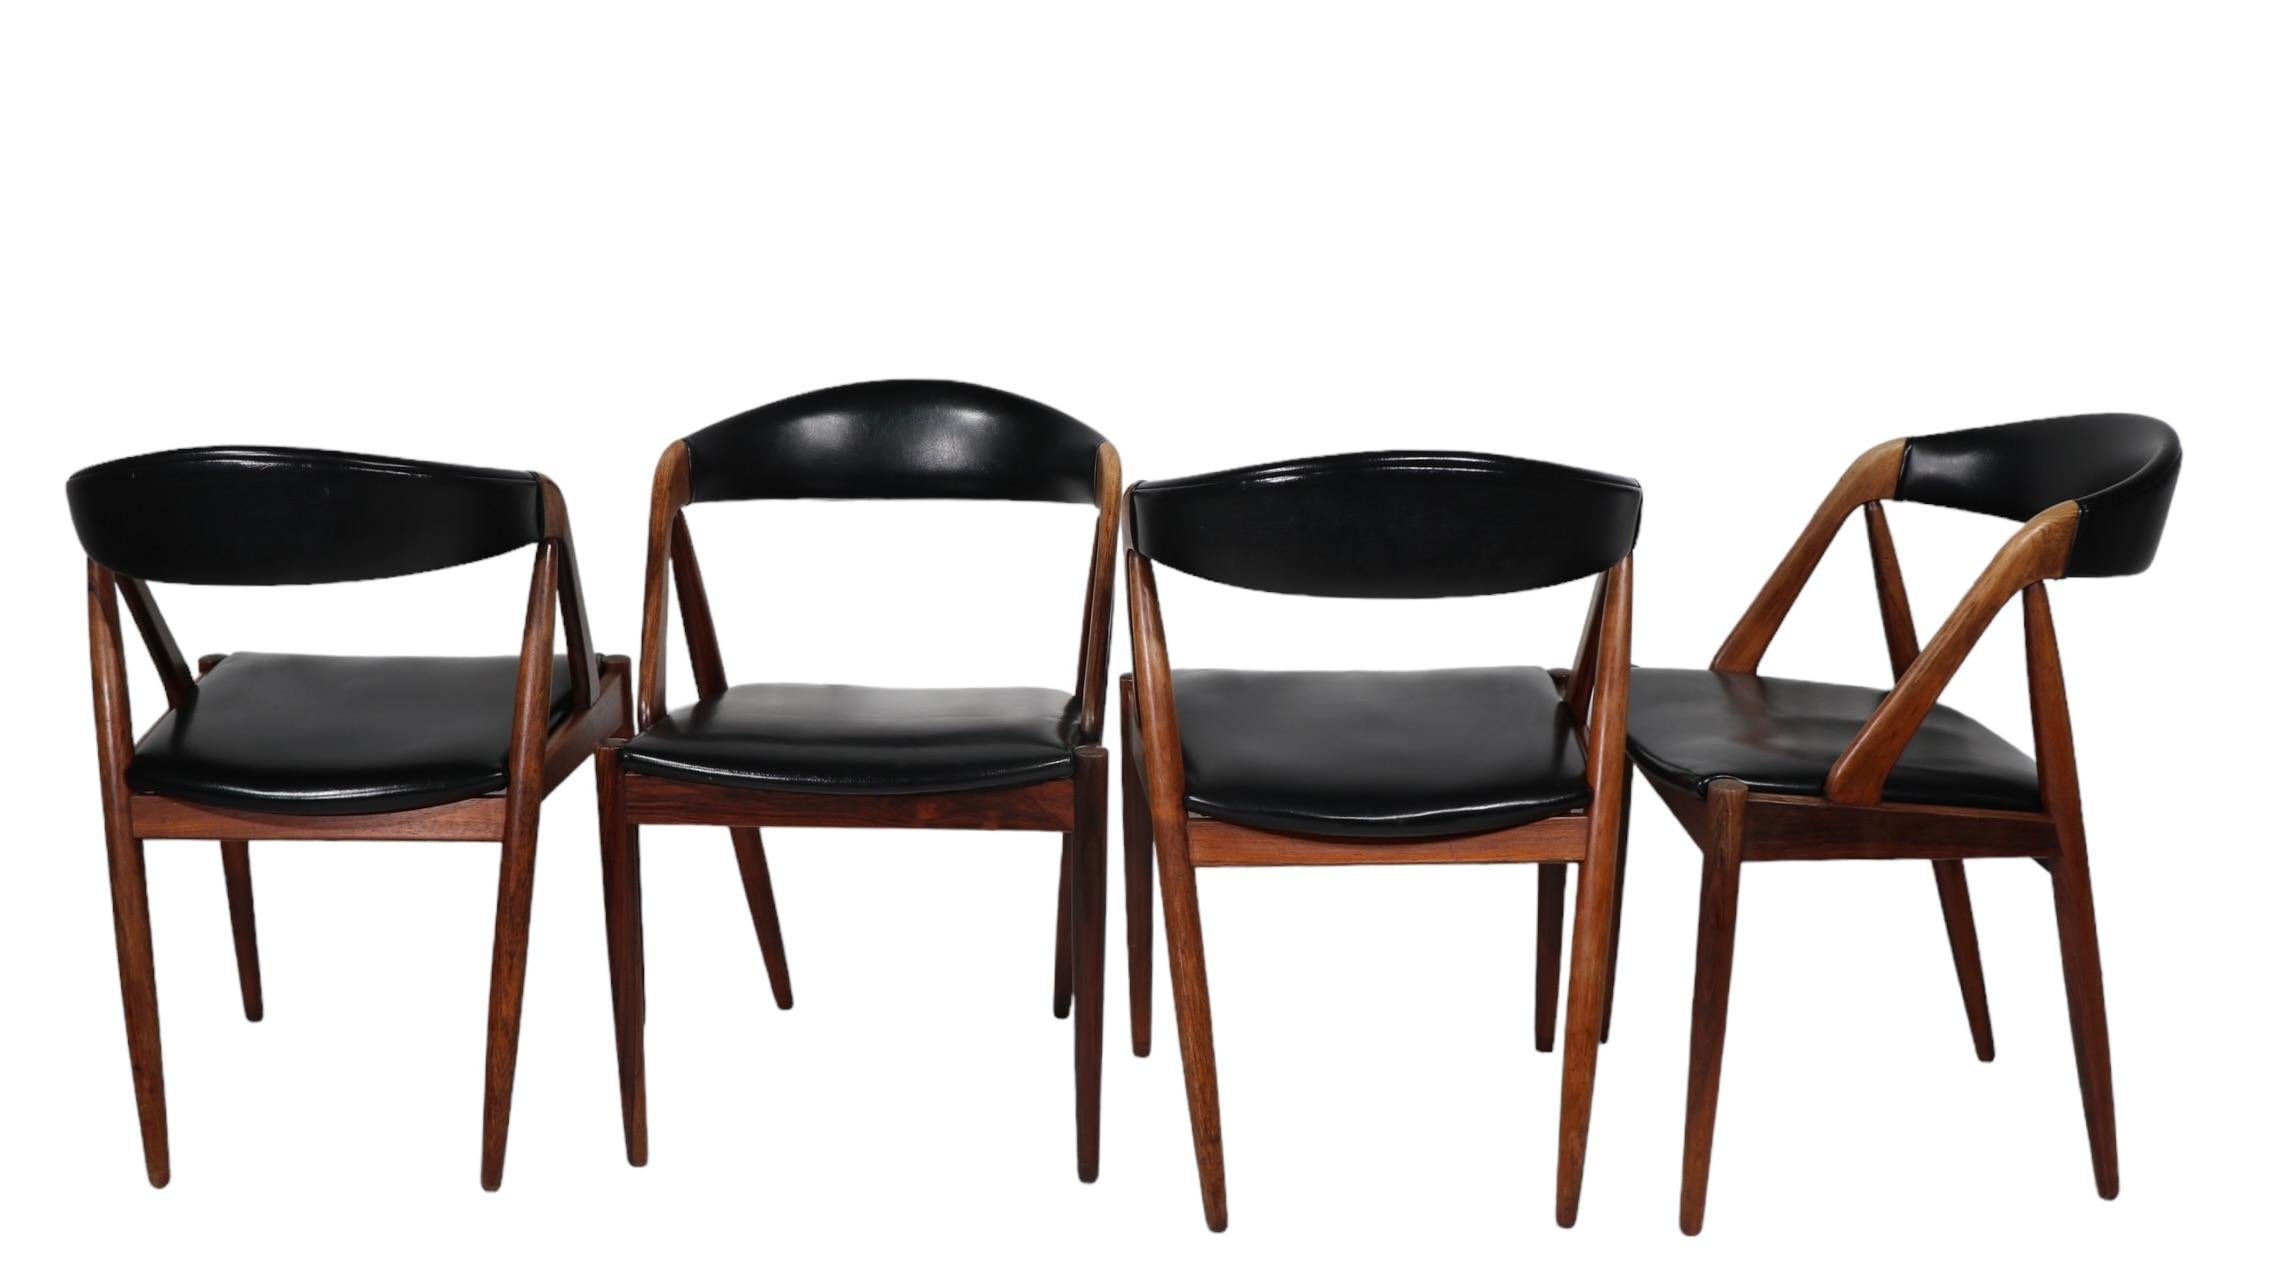  4 Rosewood Model 31 Danish Mid Century Modern Dining Chairs by Kai Kristiansen  For Sale 5